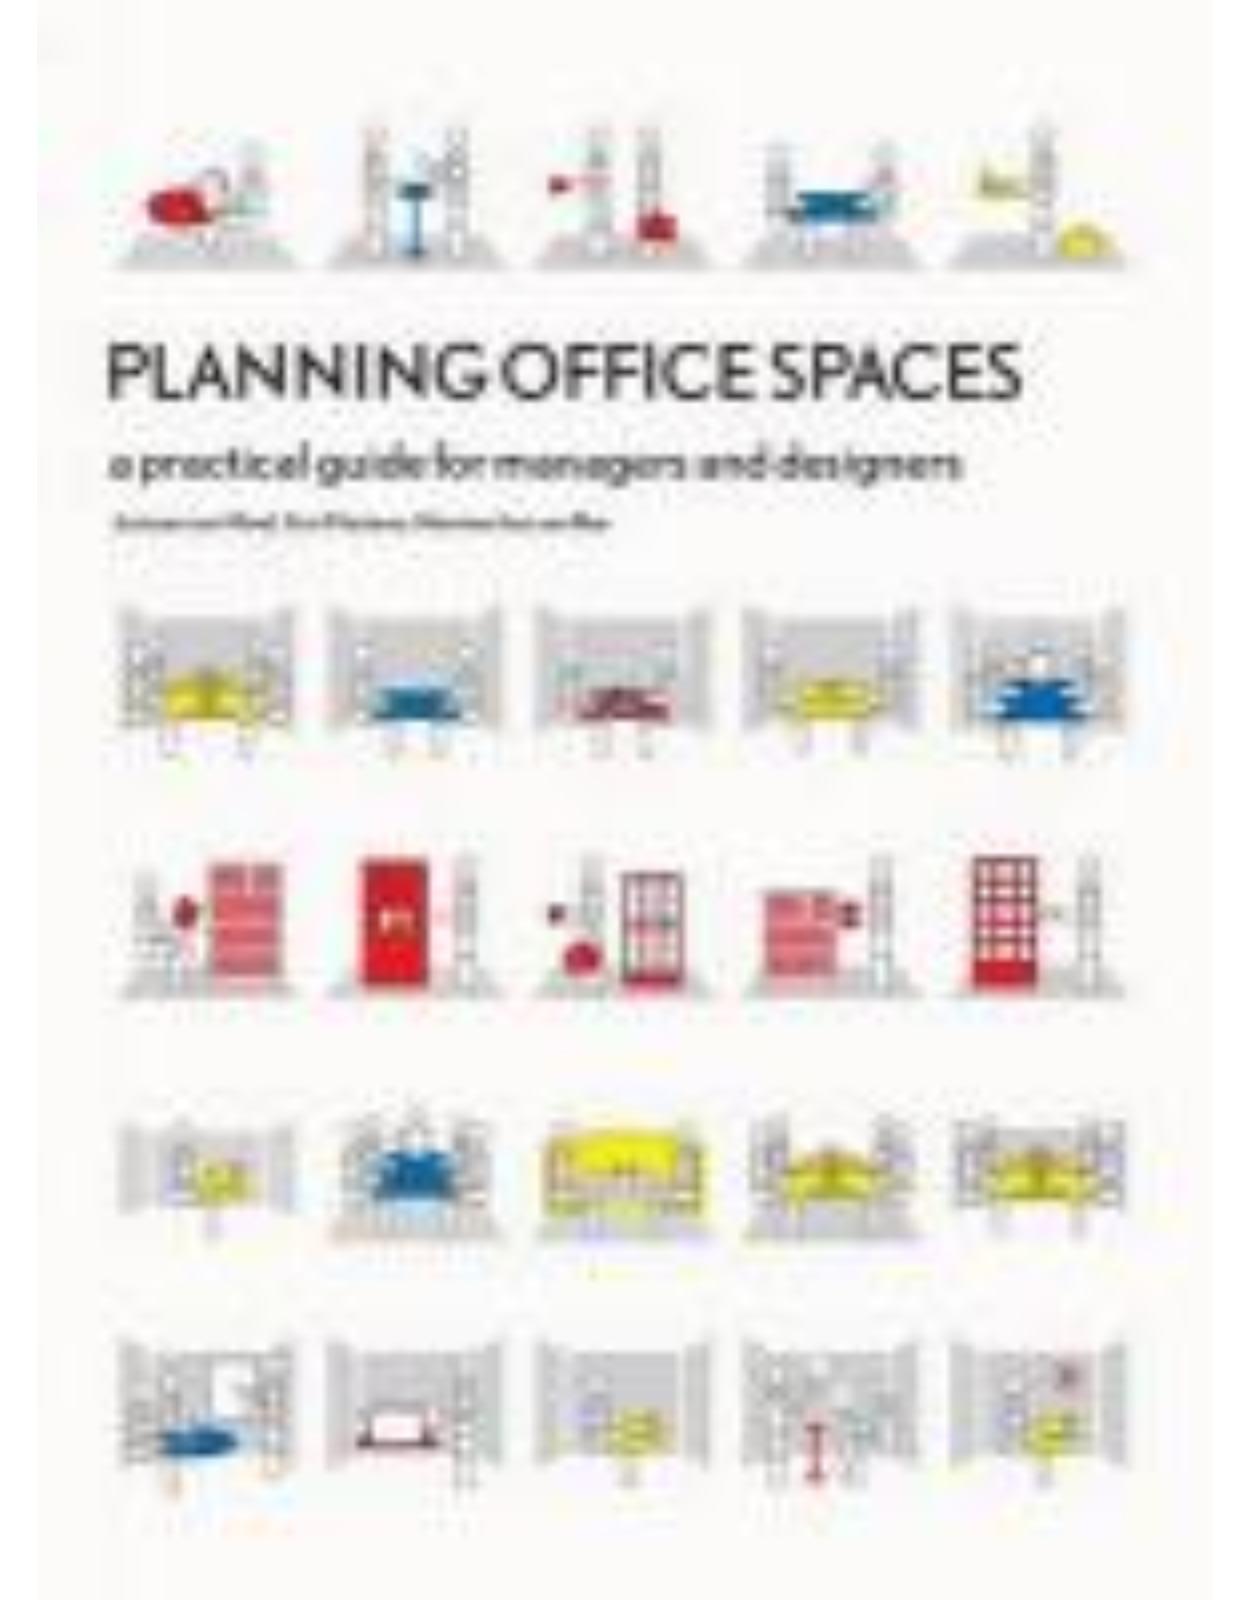 Planning Office Spaces: A Practical Guide for Managers and Designers